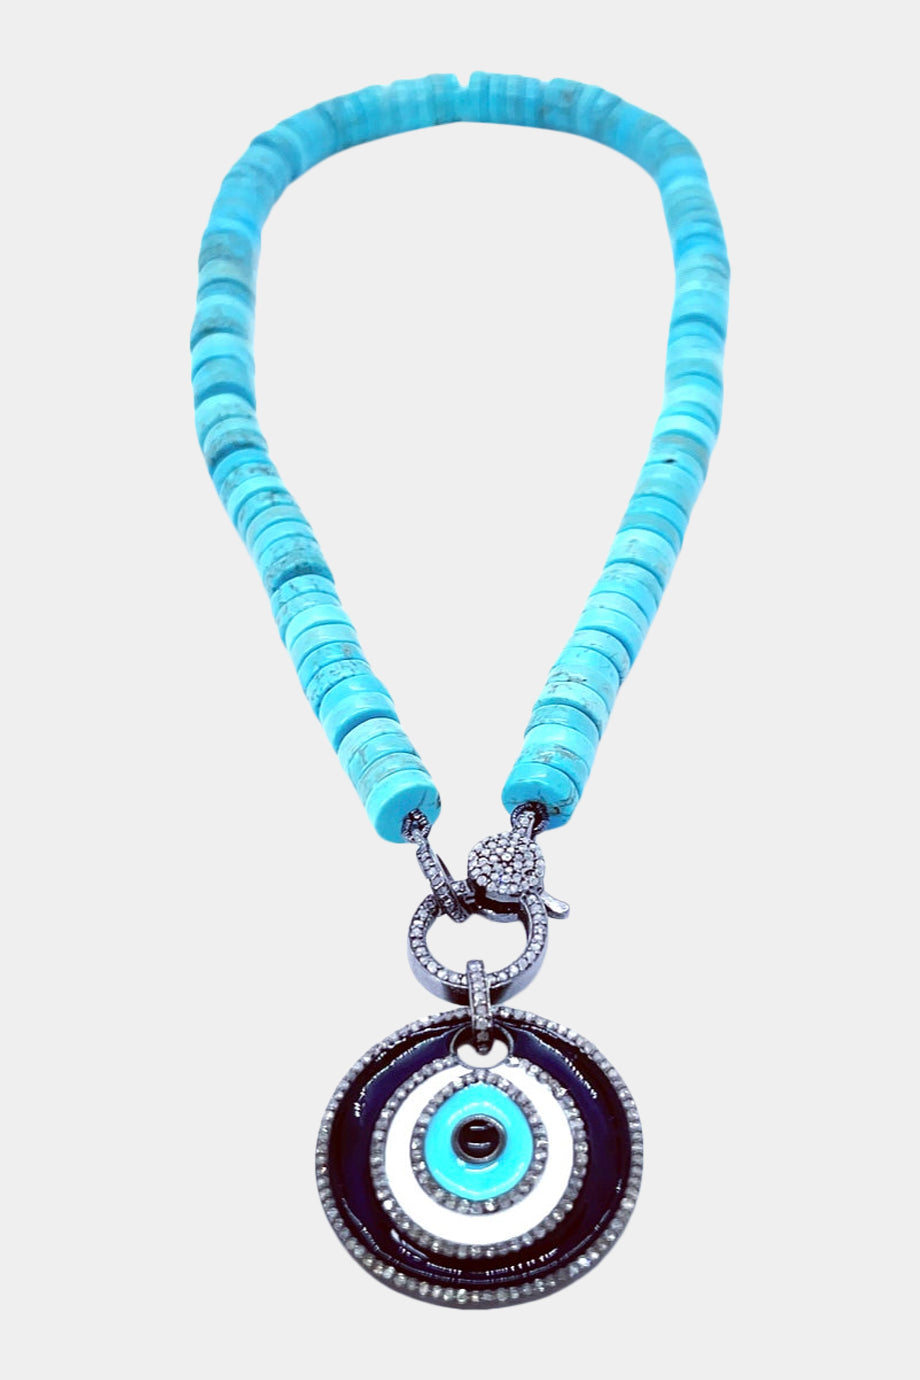 Turquoise Knotted Necklace Sterling Silver Evil Eye Pendant